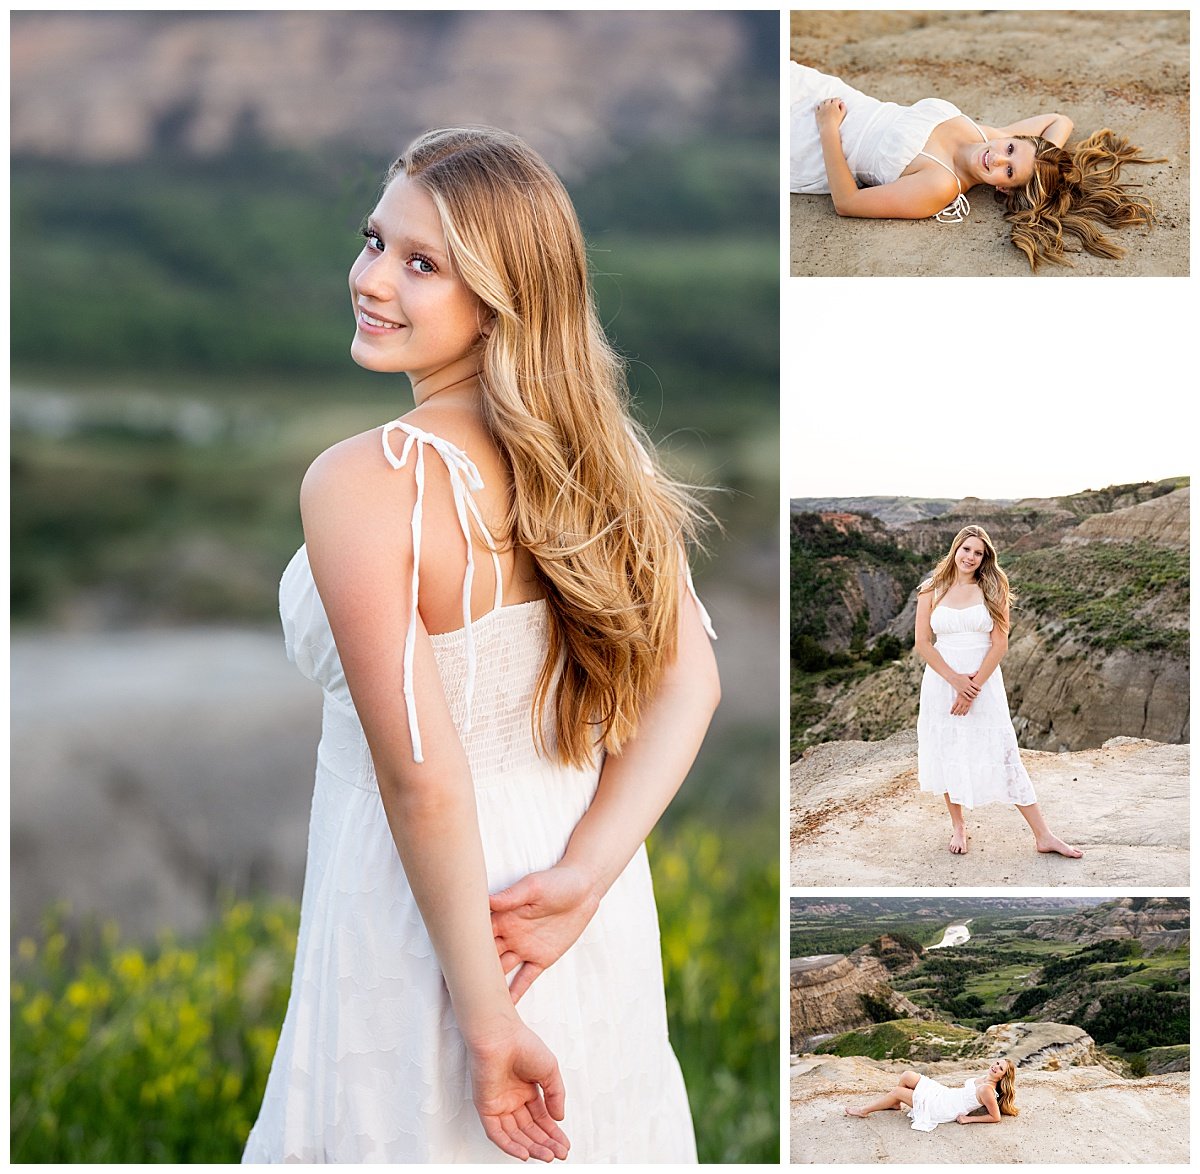 Wearing a flowy white dress with tie straps, a blonde senior poses on a cliff side during her senior photoshoot with Kellie Rochelle Photography based in North Dakota.